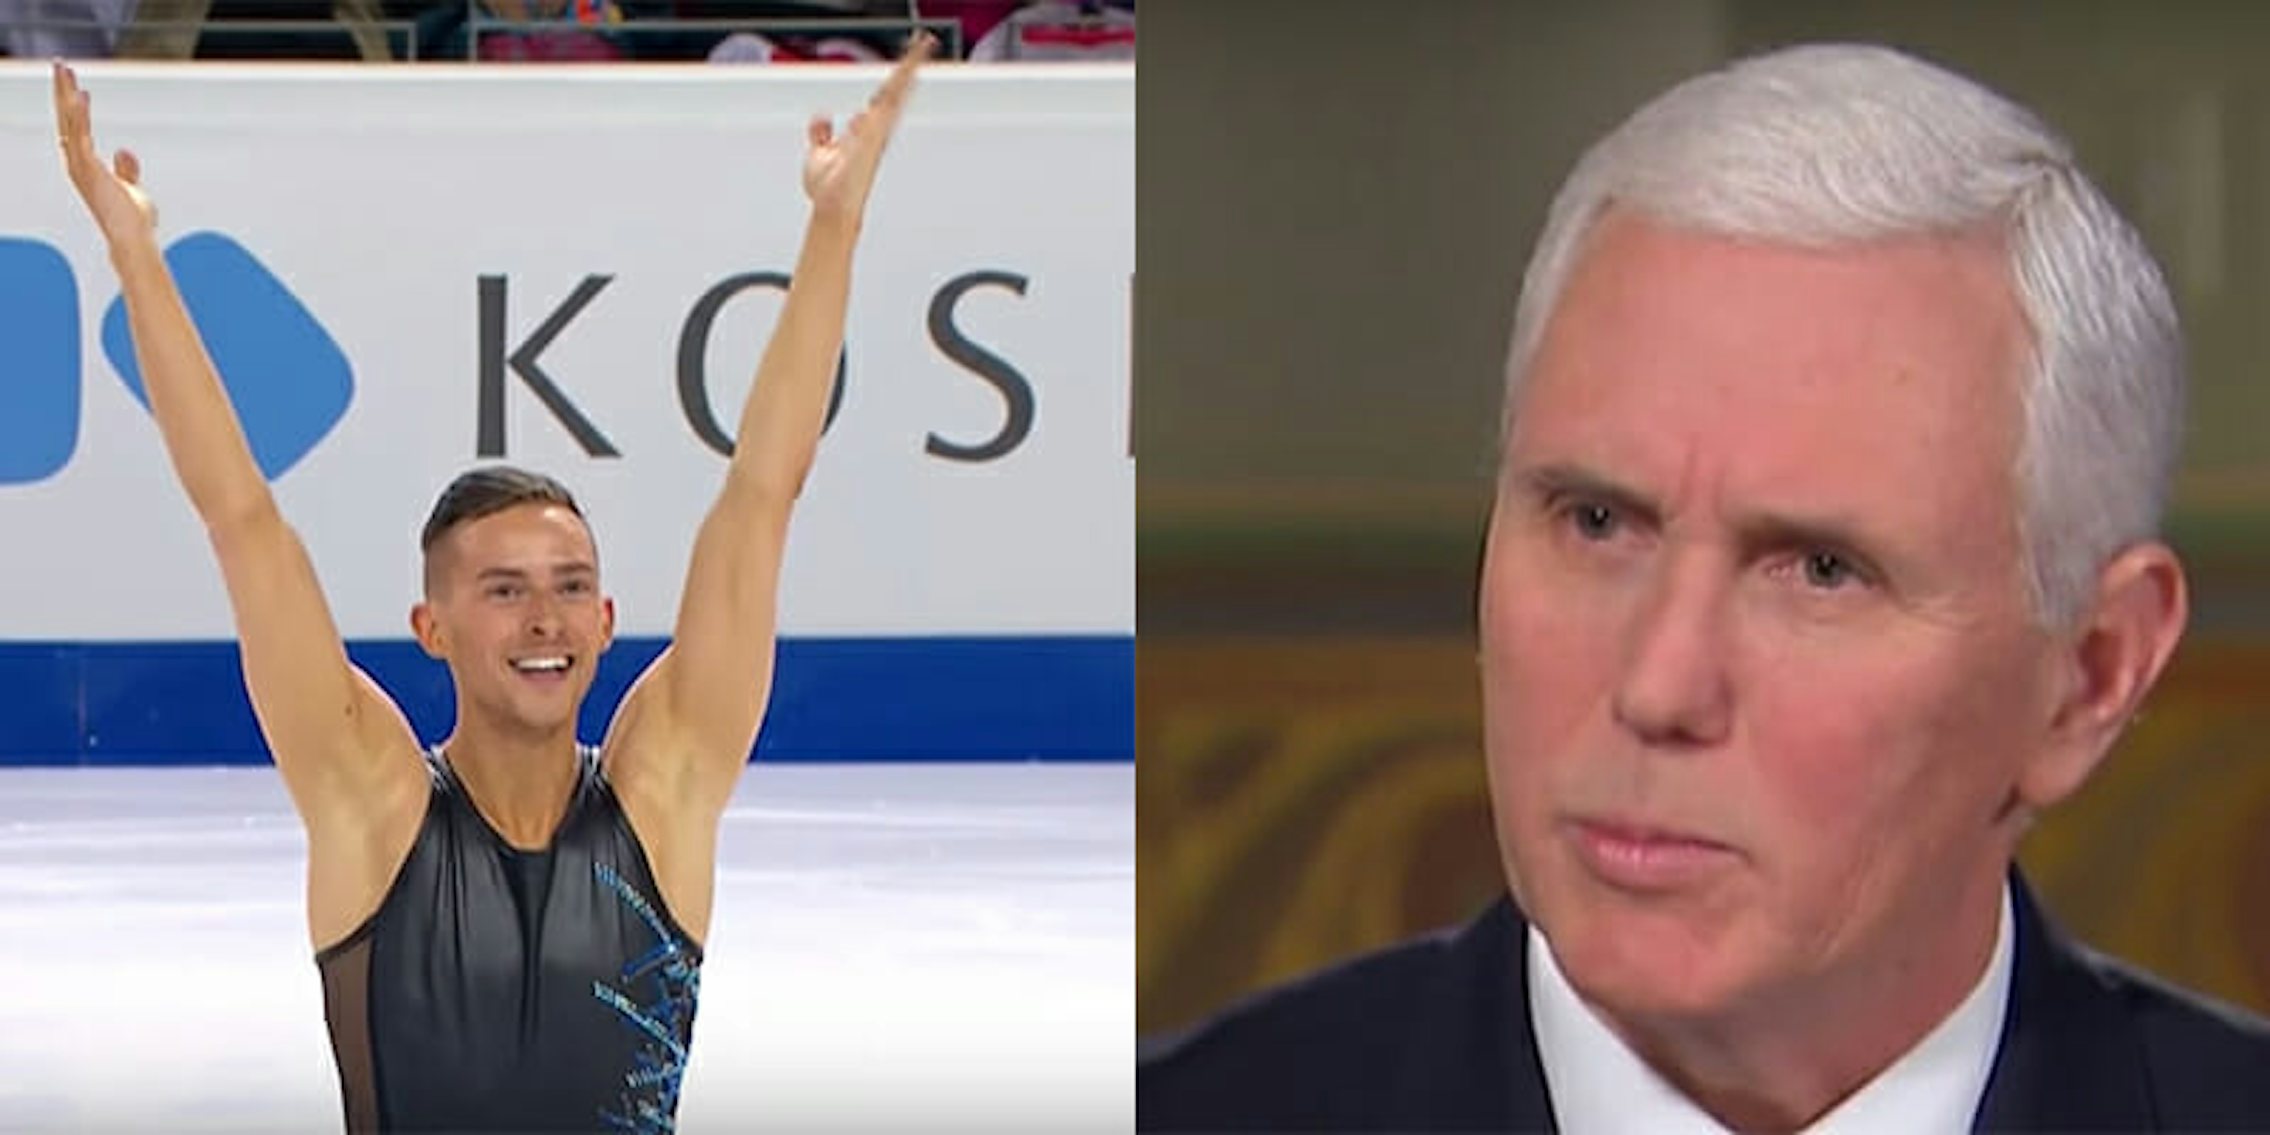 Adam Rippon, an openly gay Olympic figure skater, reportedly refused to meet with Vice President Mike Pence.